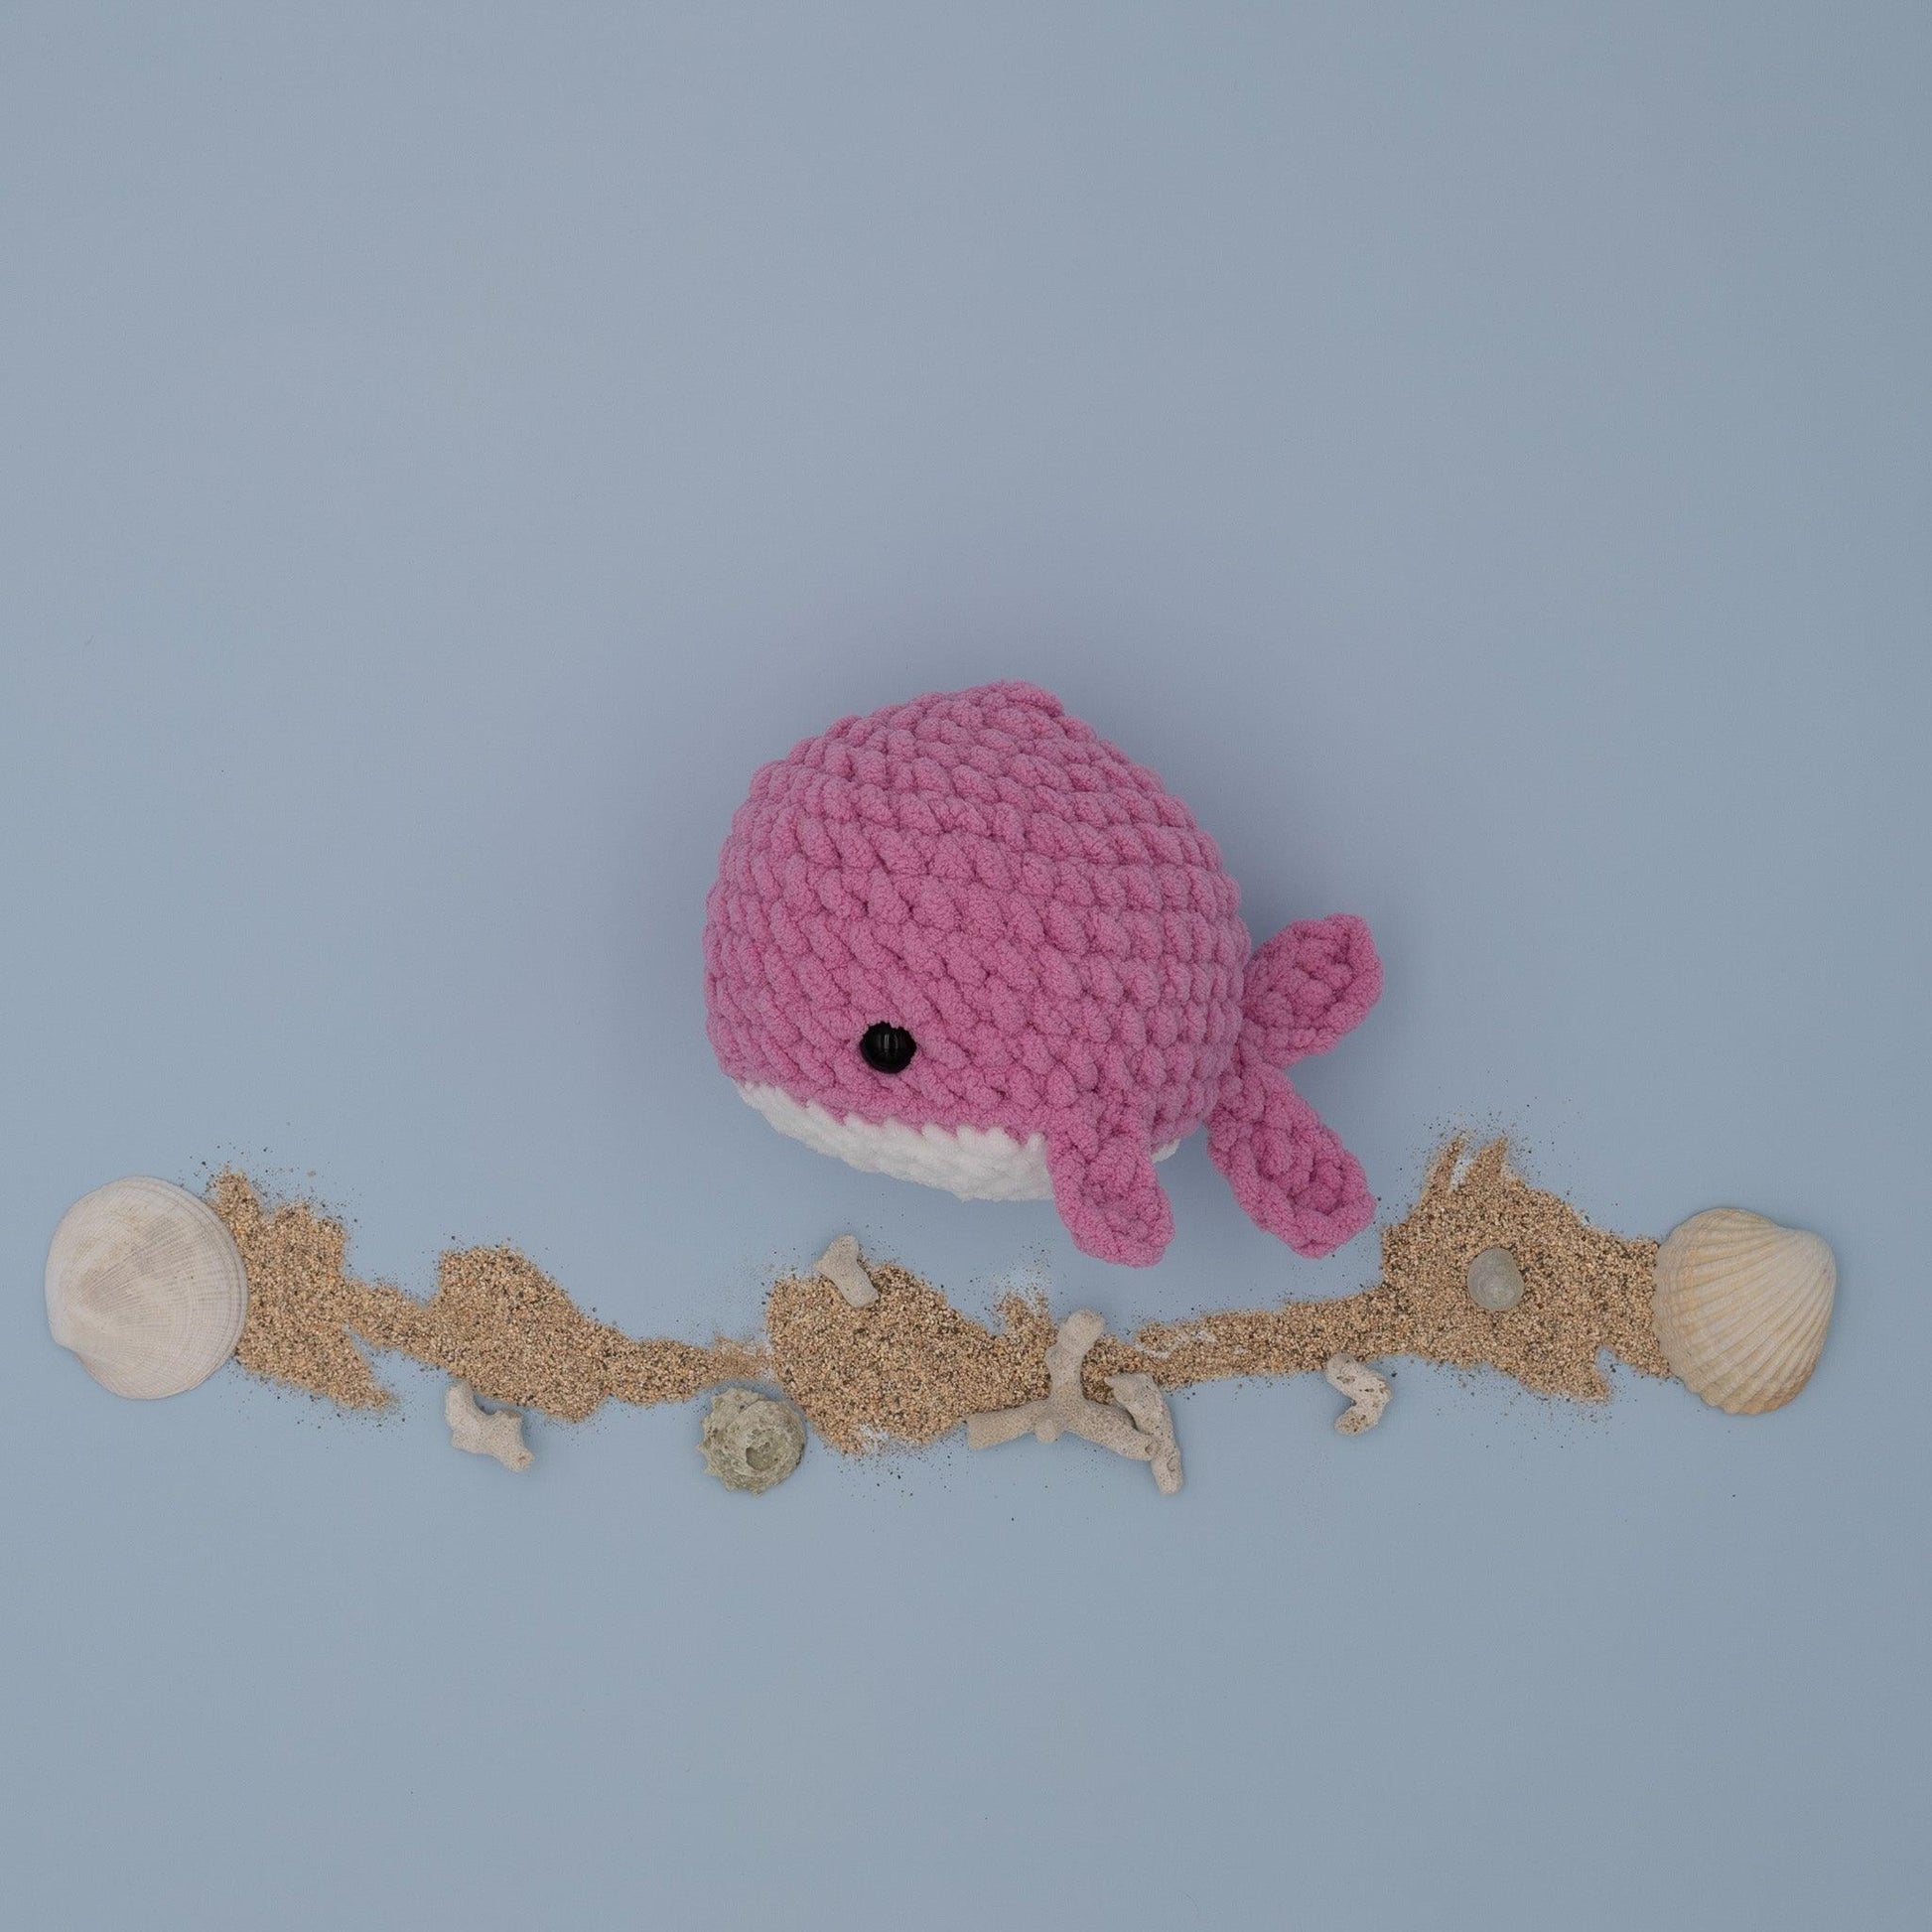 4Stitches Designs 9 Inch Crochet Whale Plush Toy - Hand-Made Stuffed Animal Gift for Kids